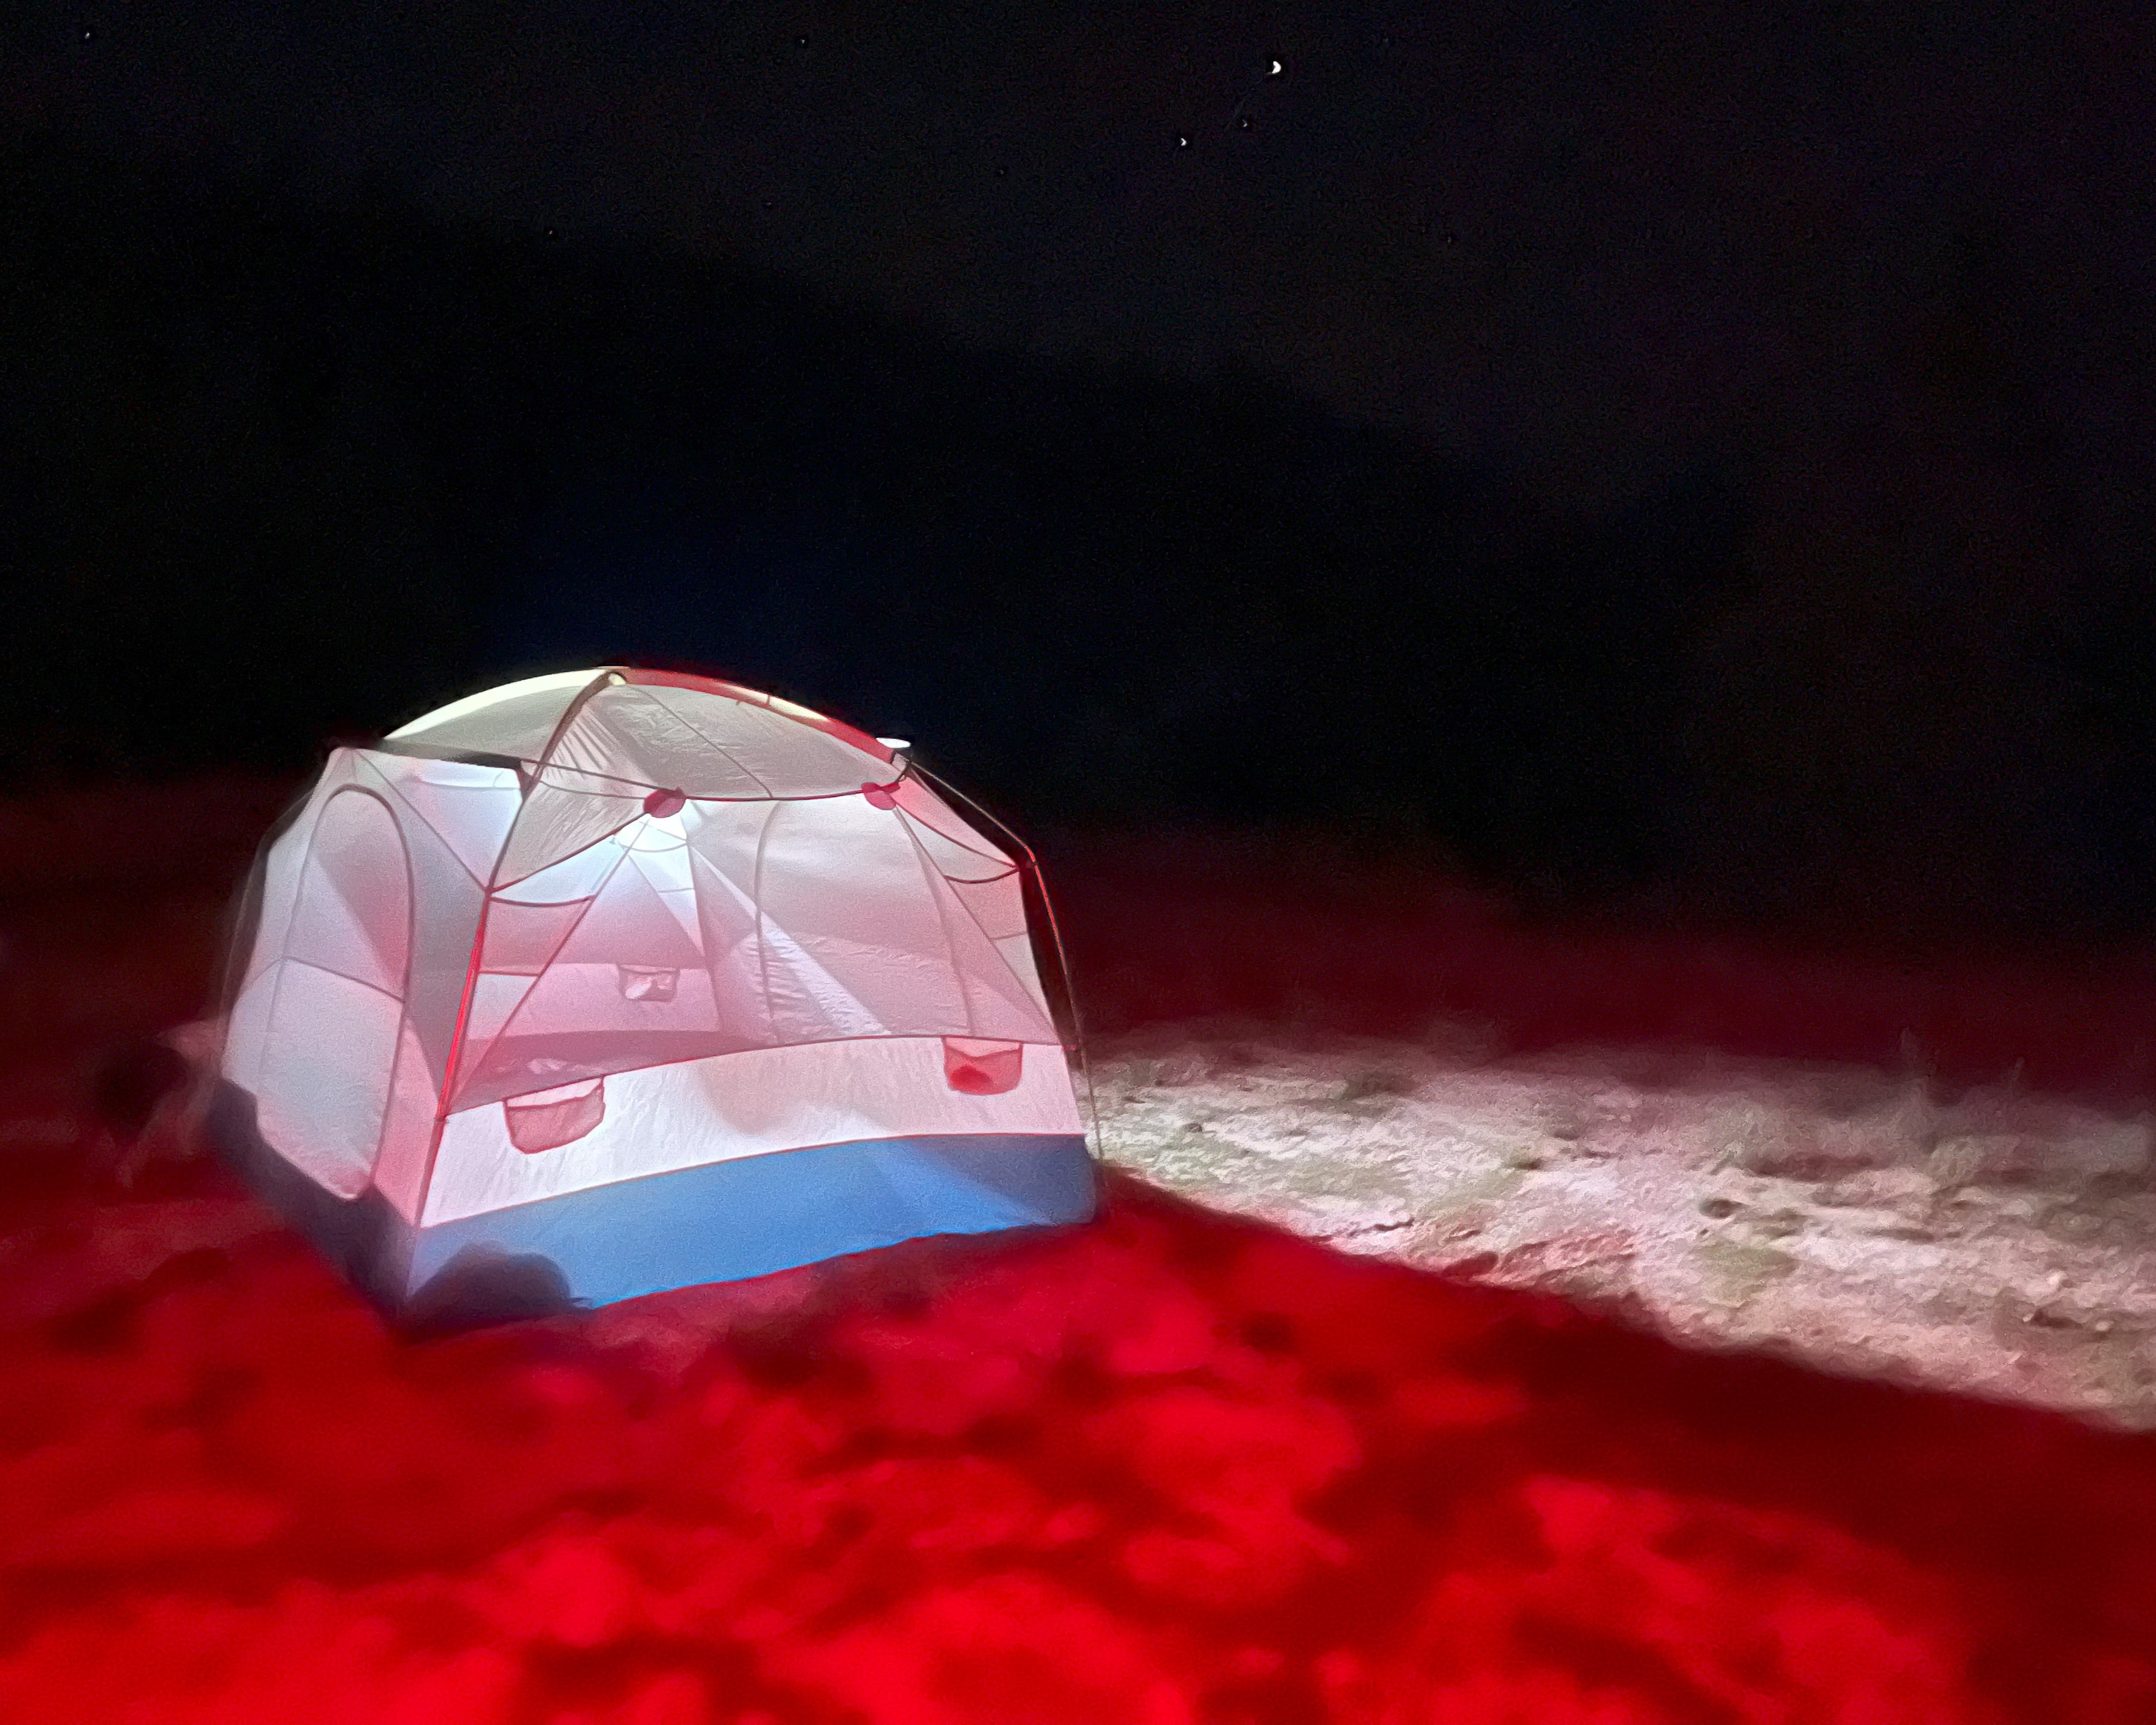 Hunter's tent lit up with headlamps and lanterns late at night_PC Connor Jay Liess